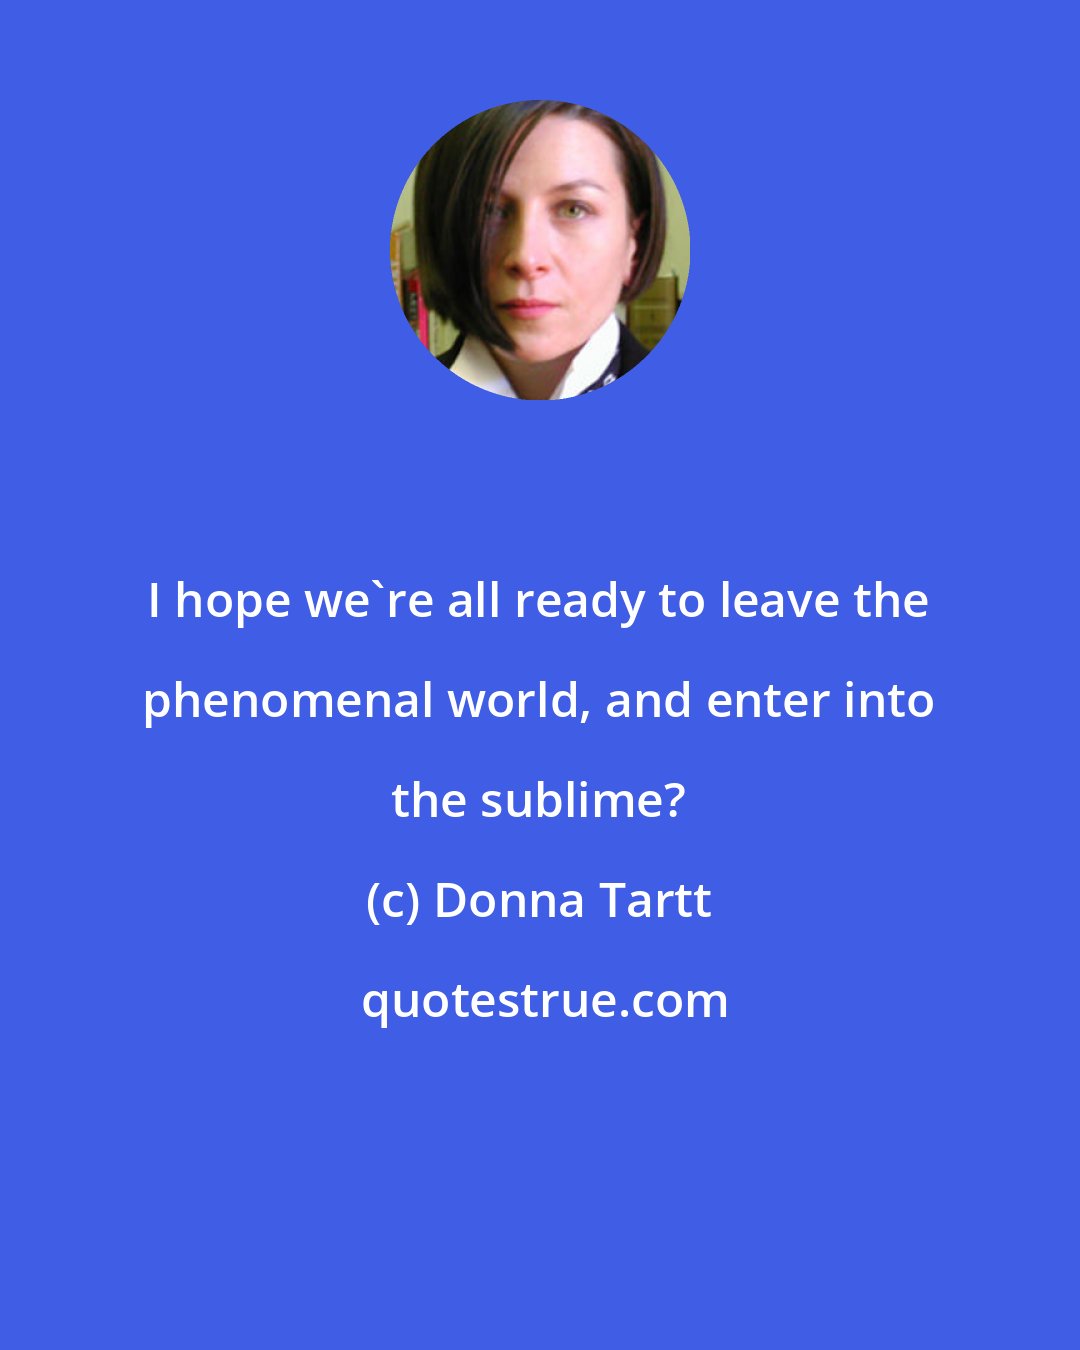 Donna Tartt: I hope we're all ready to leave the phenomenal world, and enter into the sublime?